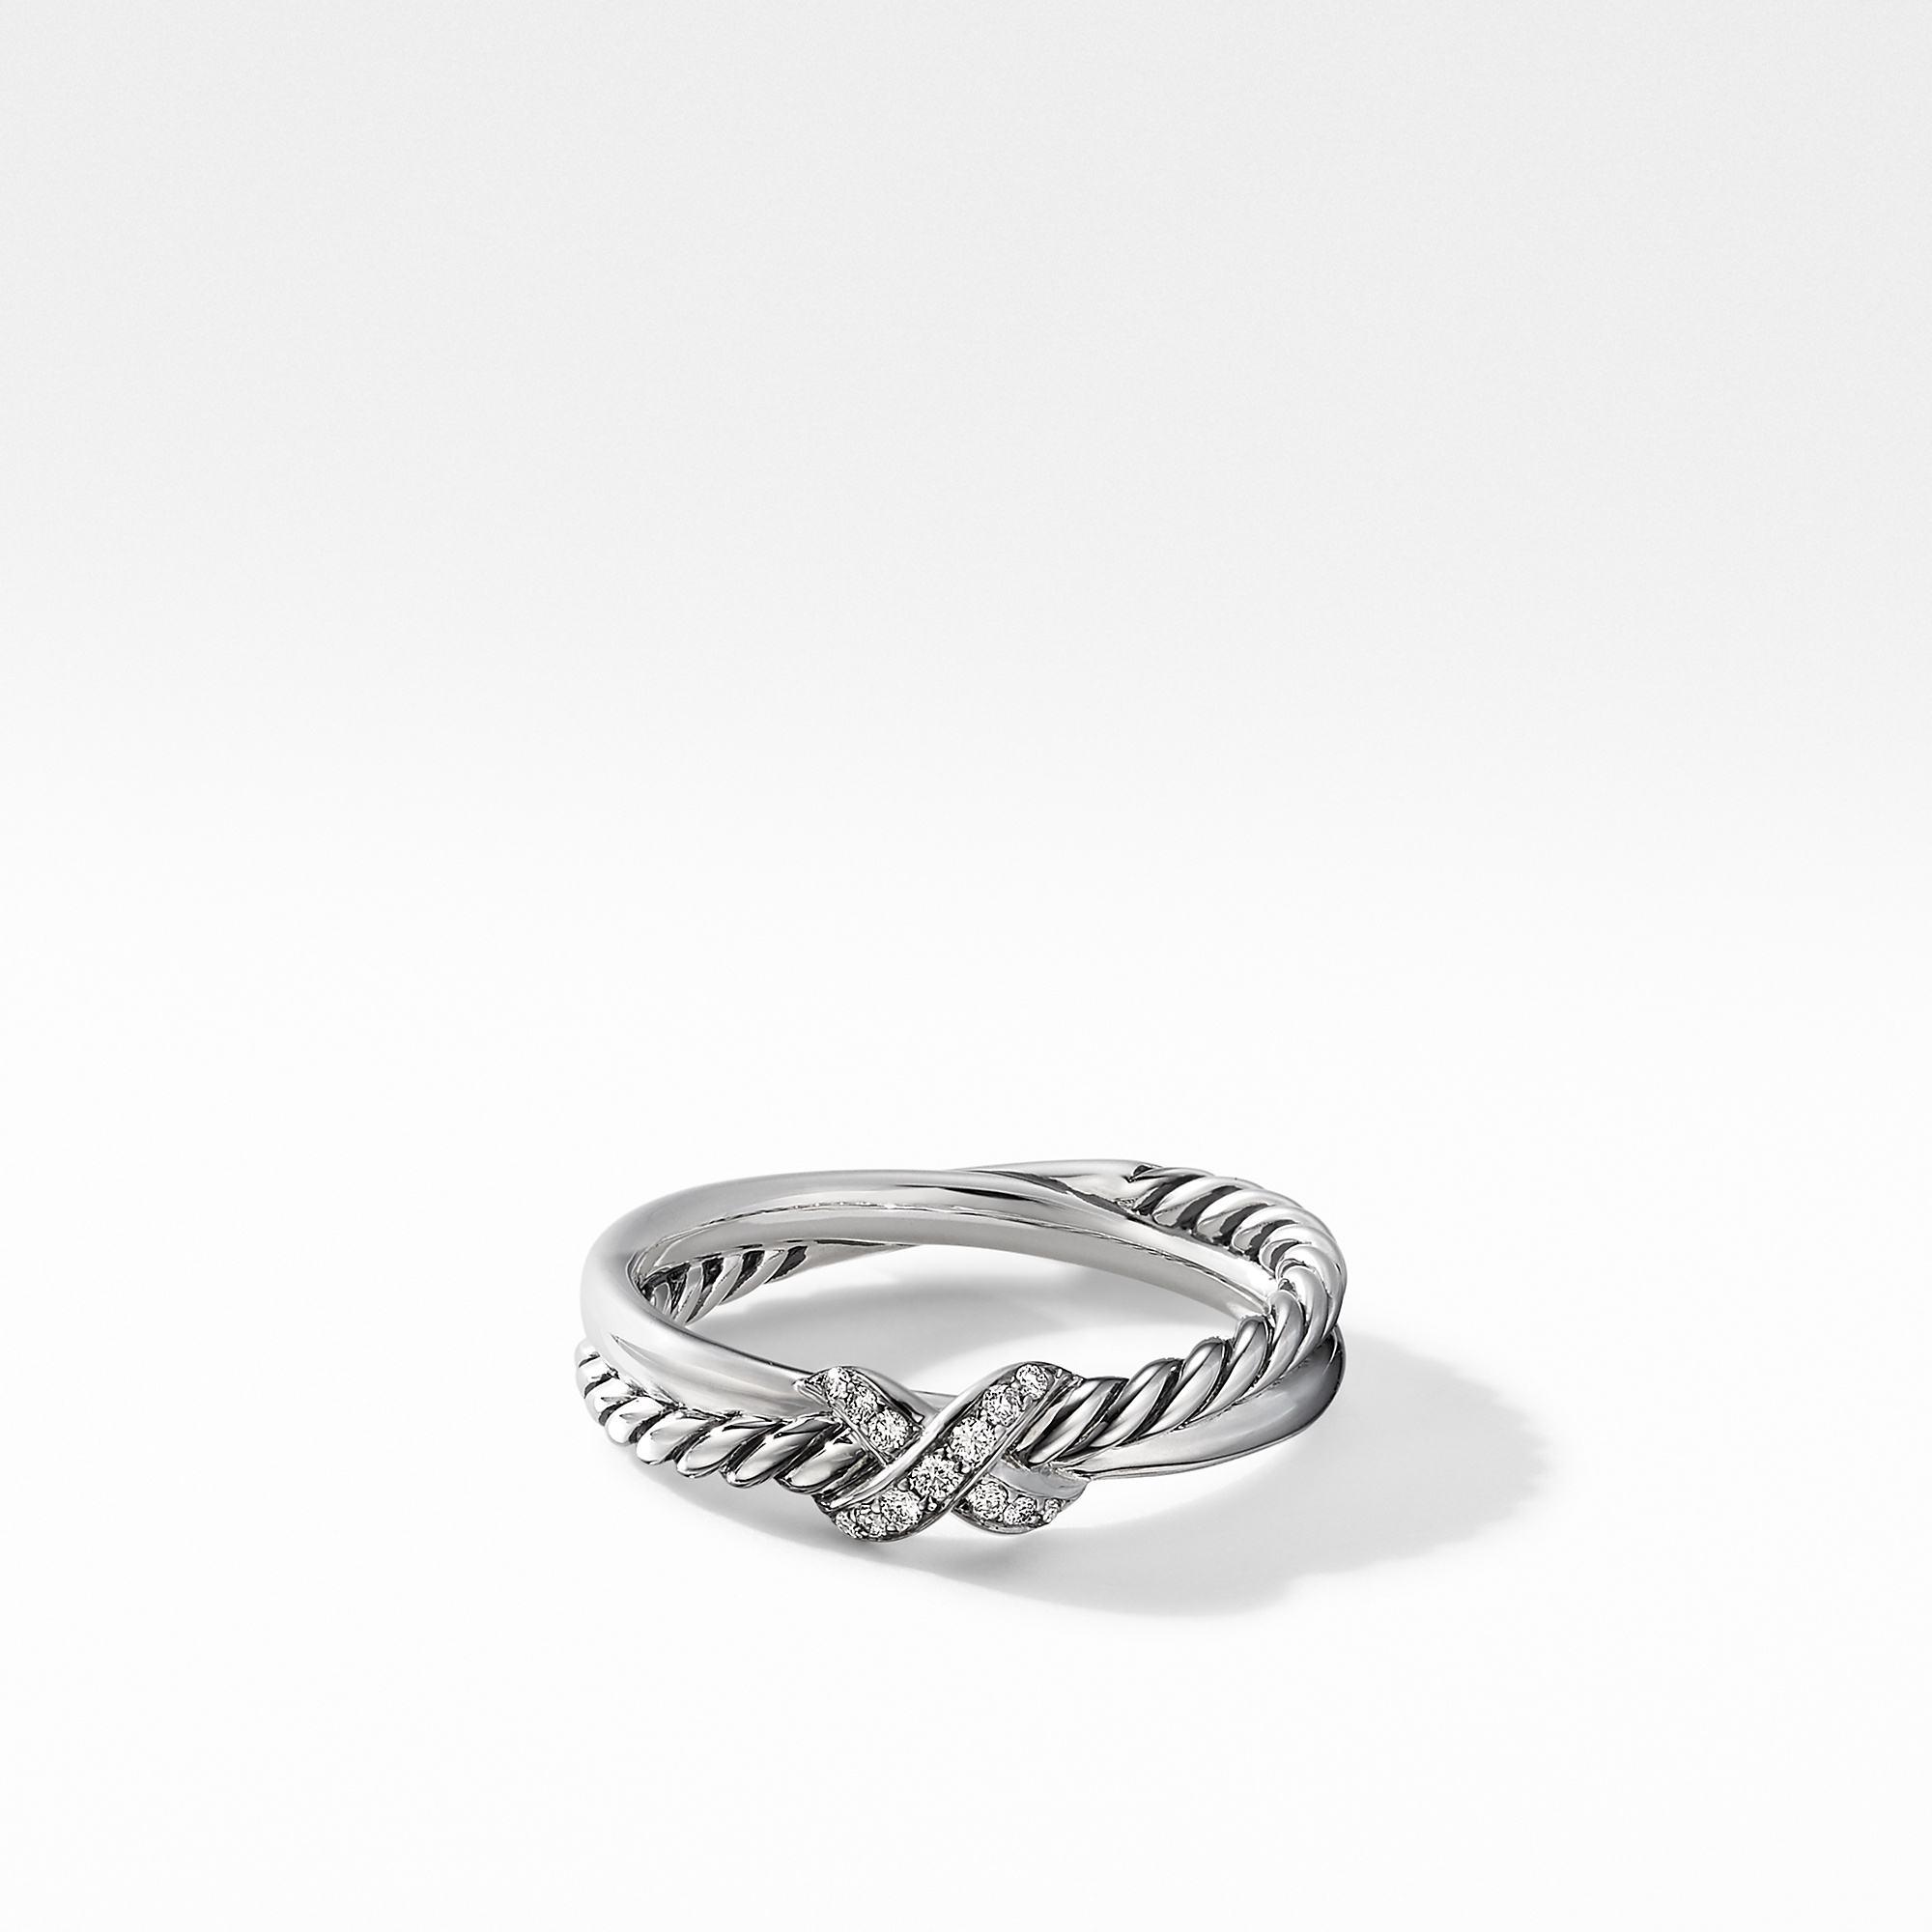 David Yurman Petite X Crossover Ring in Sterling Silver with Pave Diamonds, size 6.5